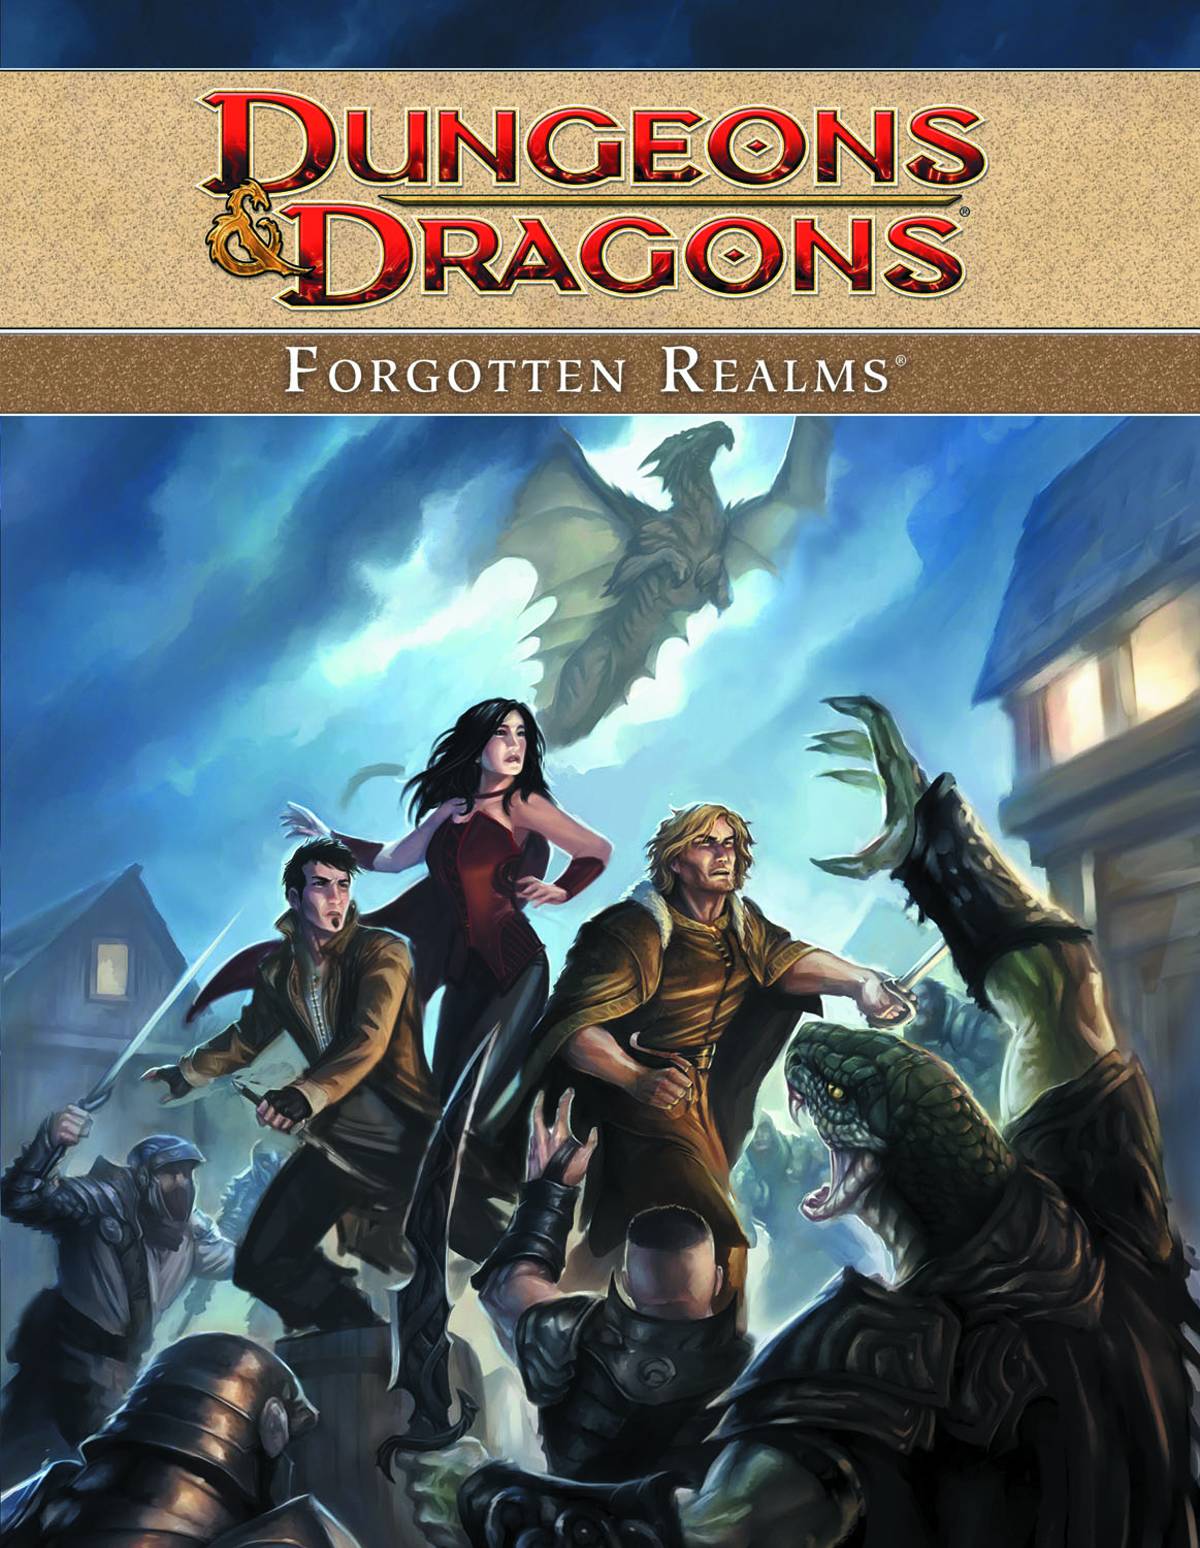 Dungeons & Dragons Forgotten Realms Graphic Novel